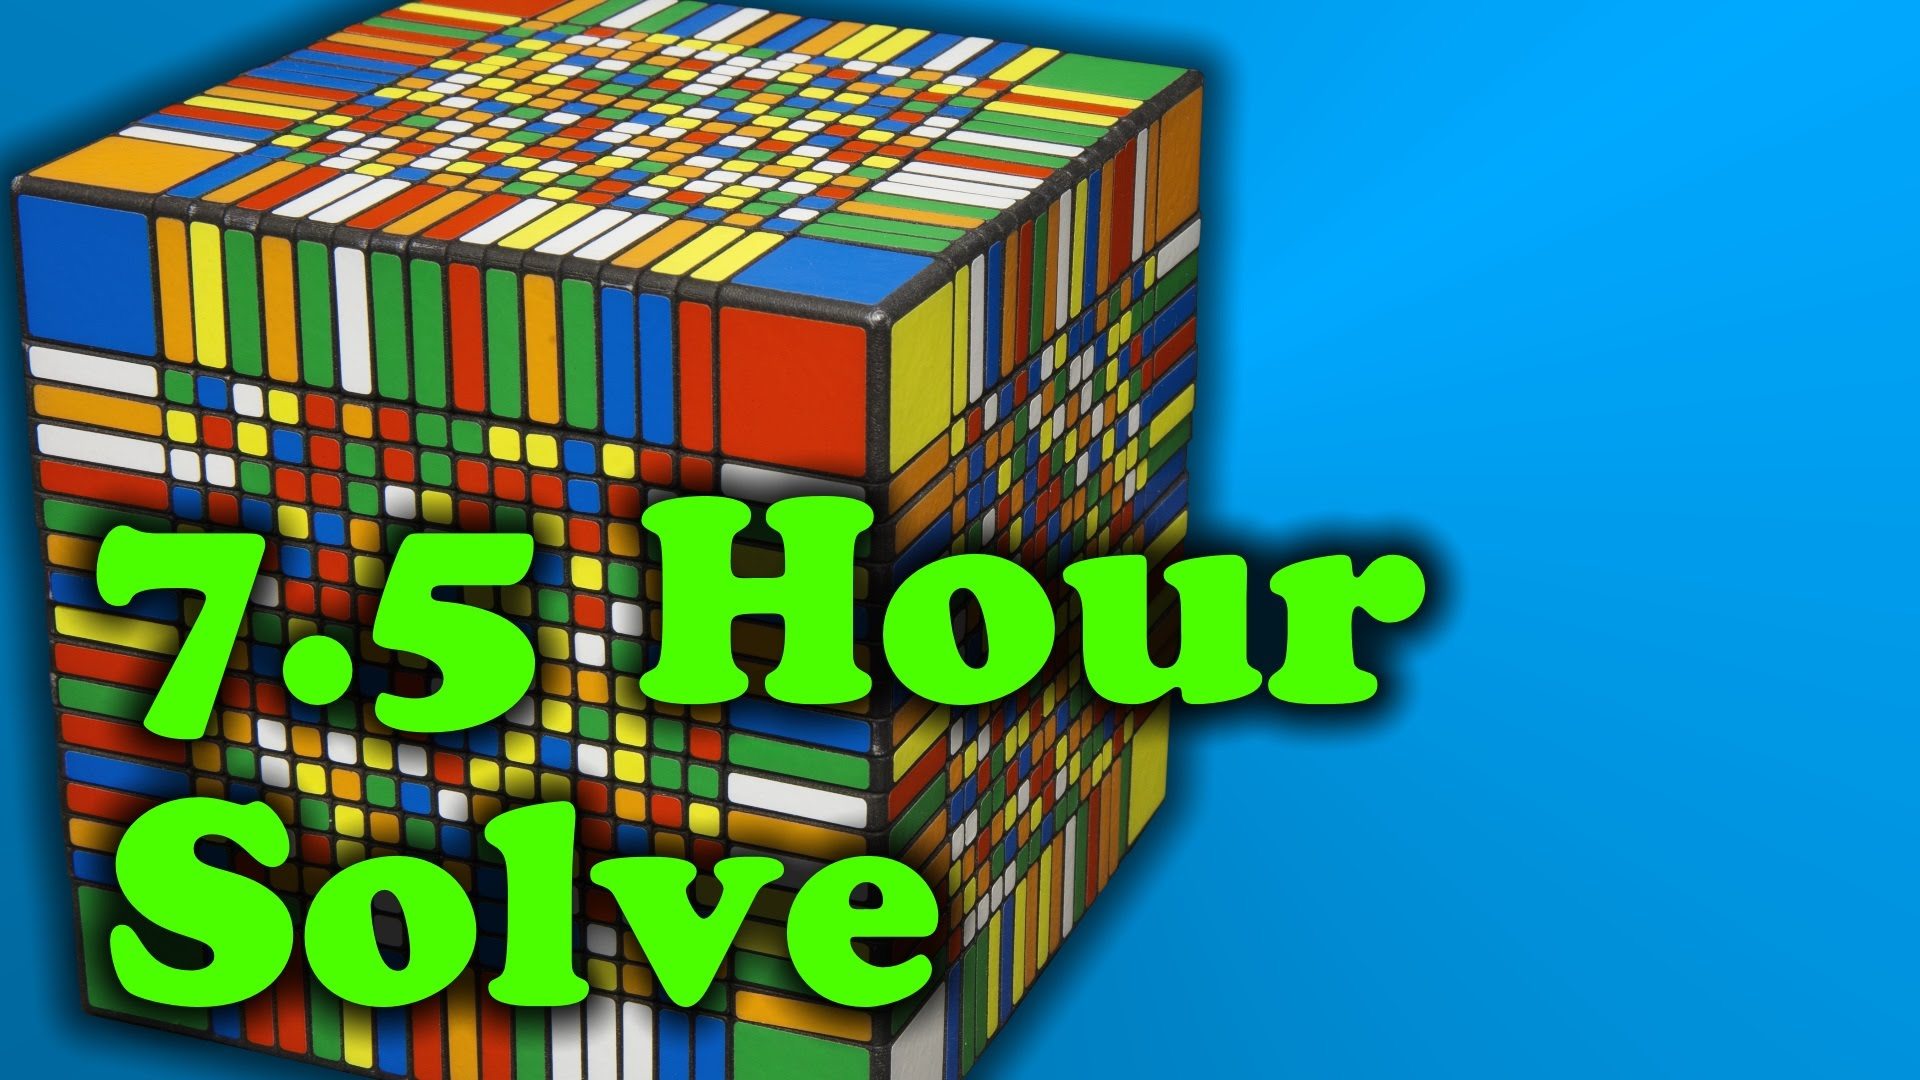 Watch How The Hardest Rubik’s Cube Was Solved In 7 Hours